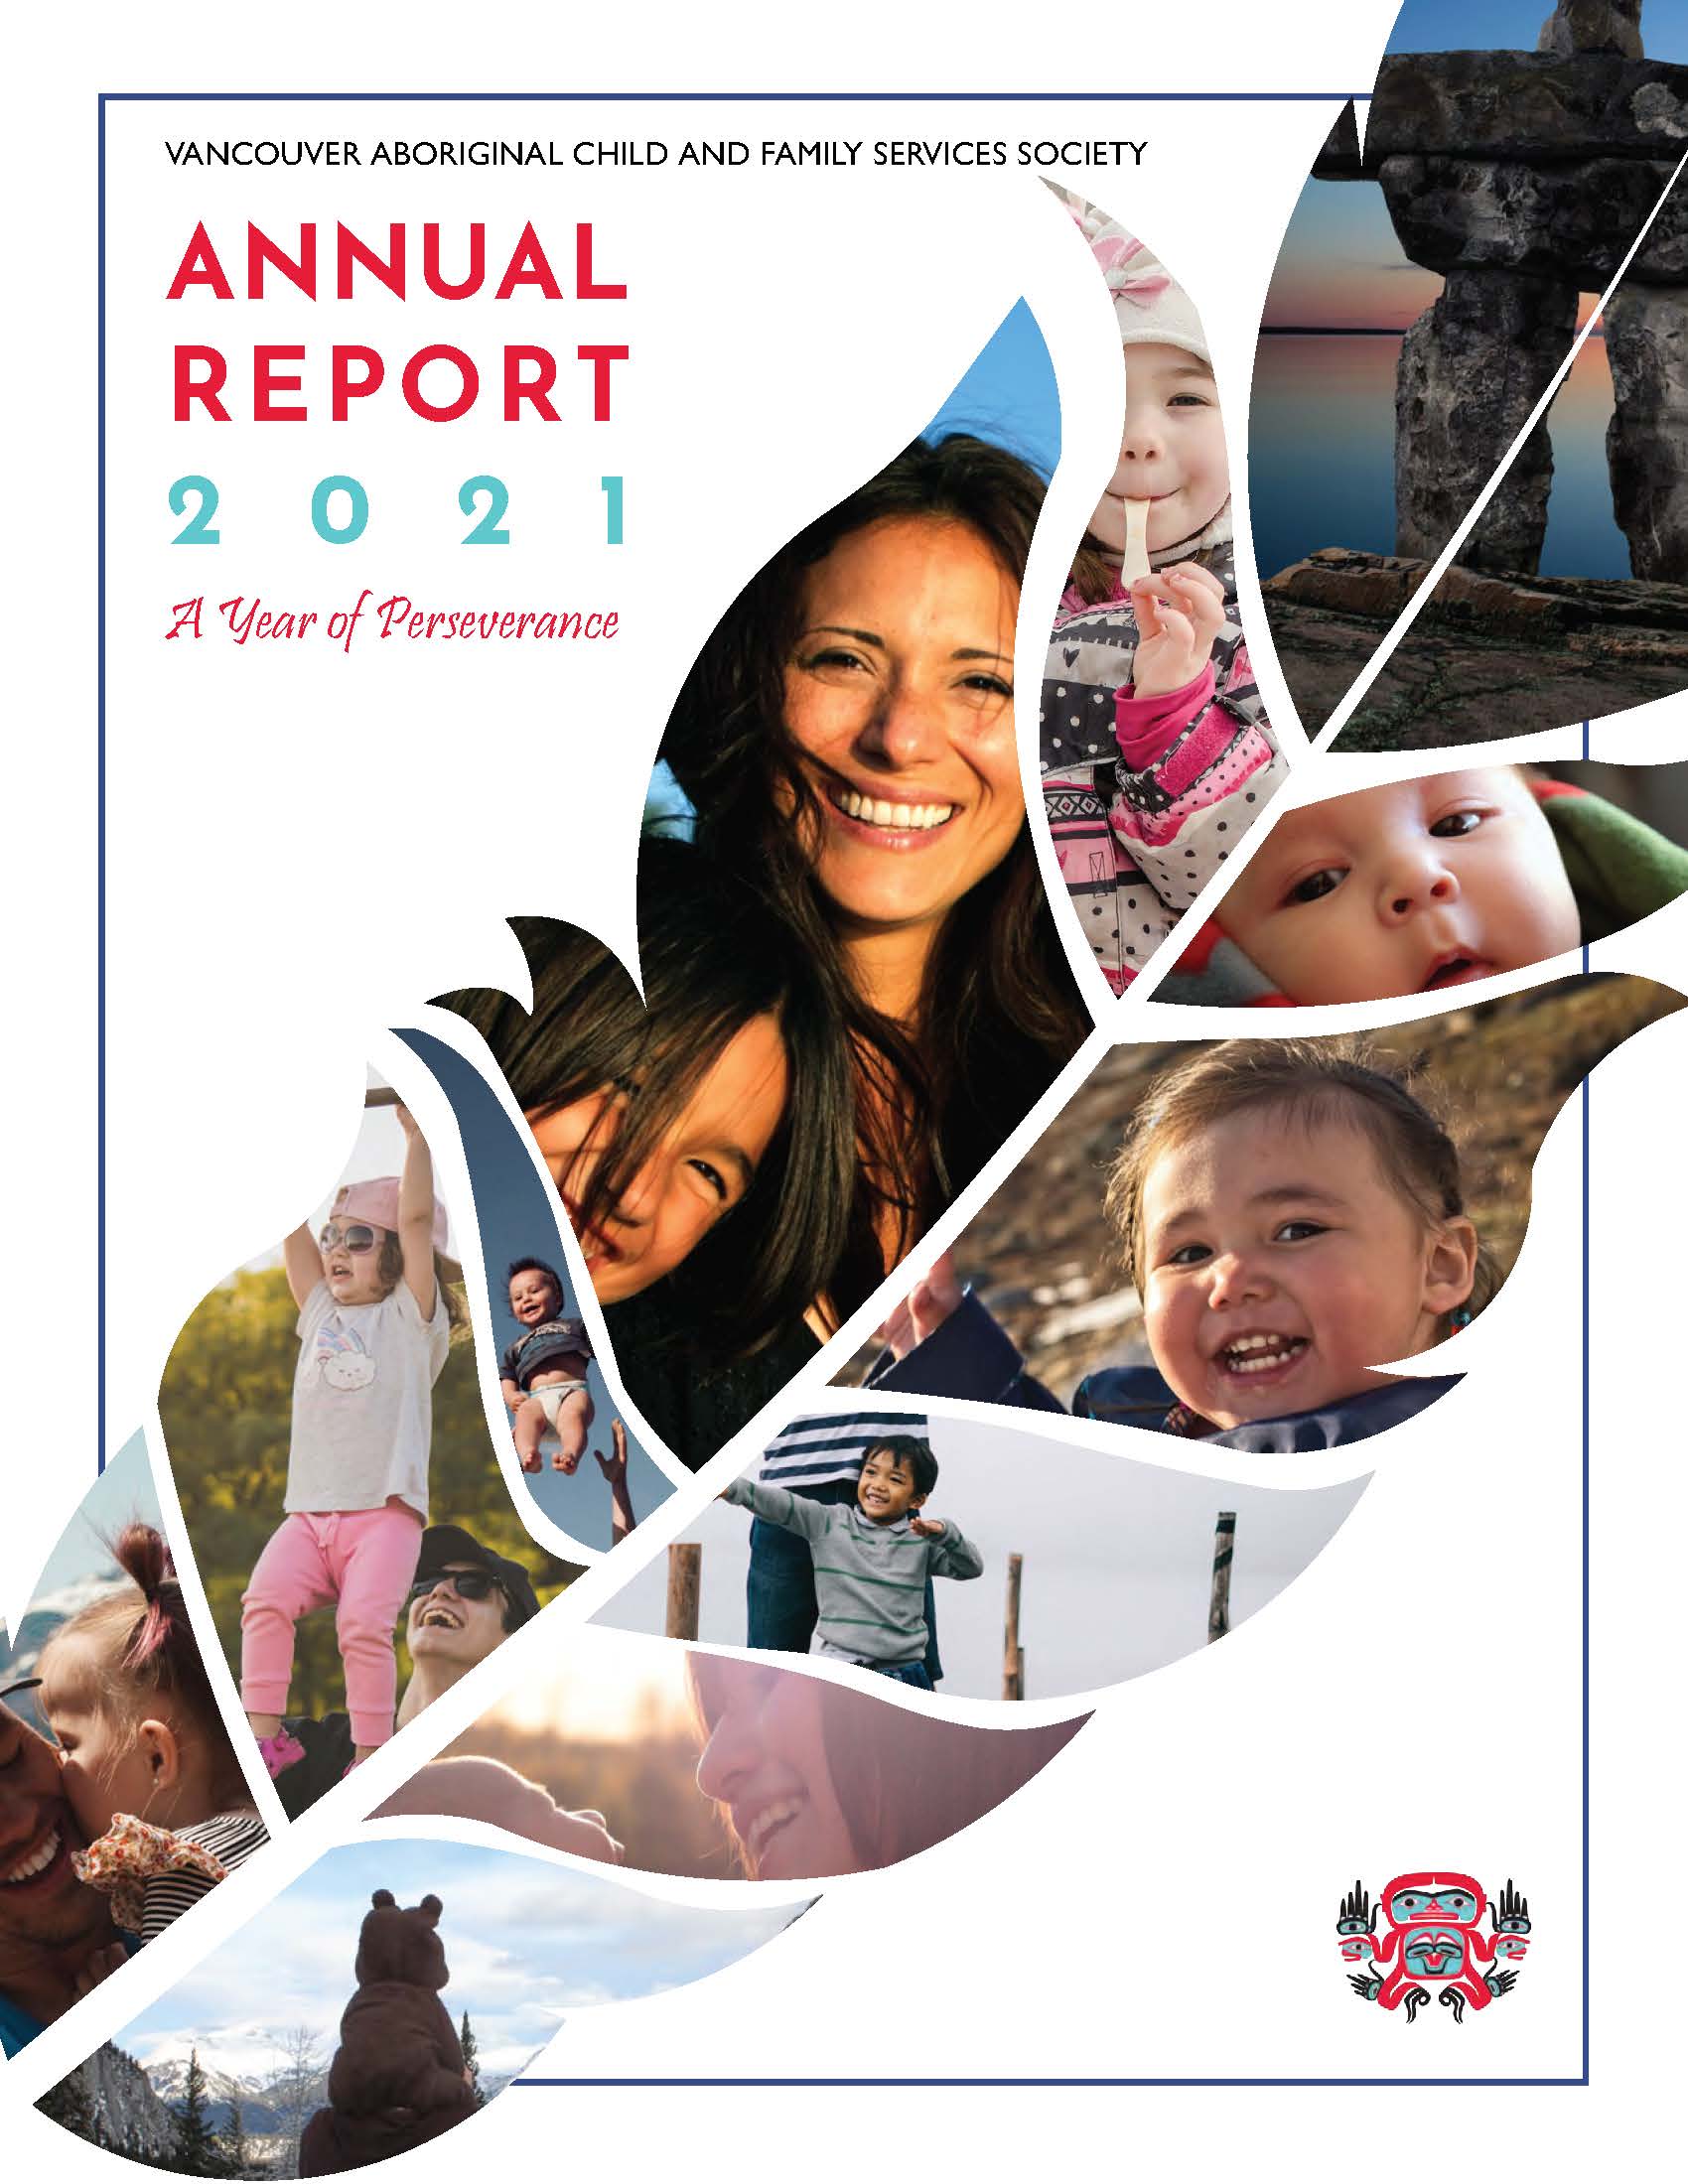 https://www.vacfss.com/wp-content/uploads/2021/07/Pages-from-2021-Annual-Report-Final-Two-Page-Spread.jpg